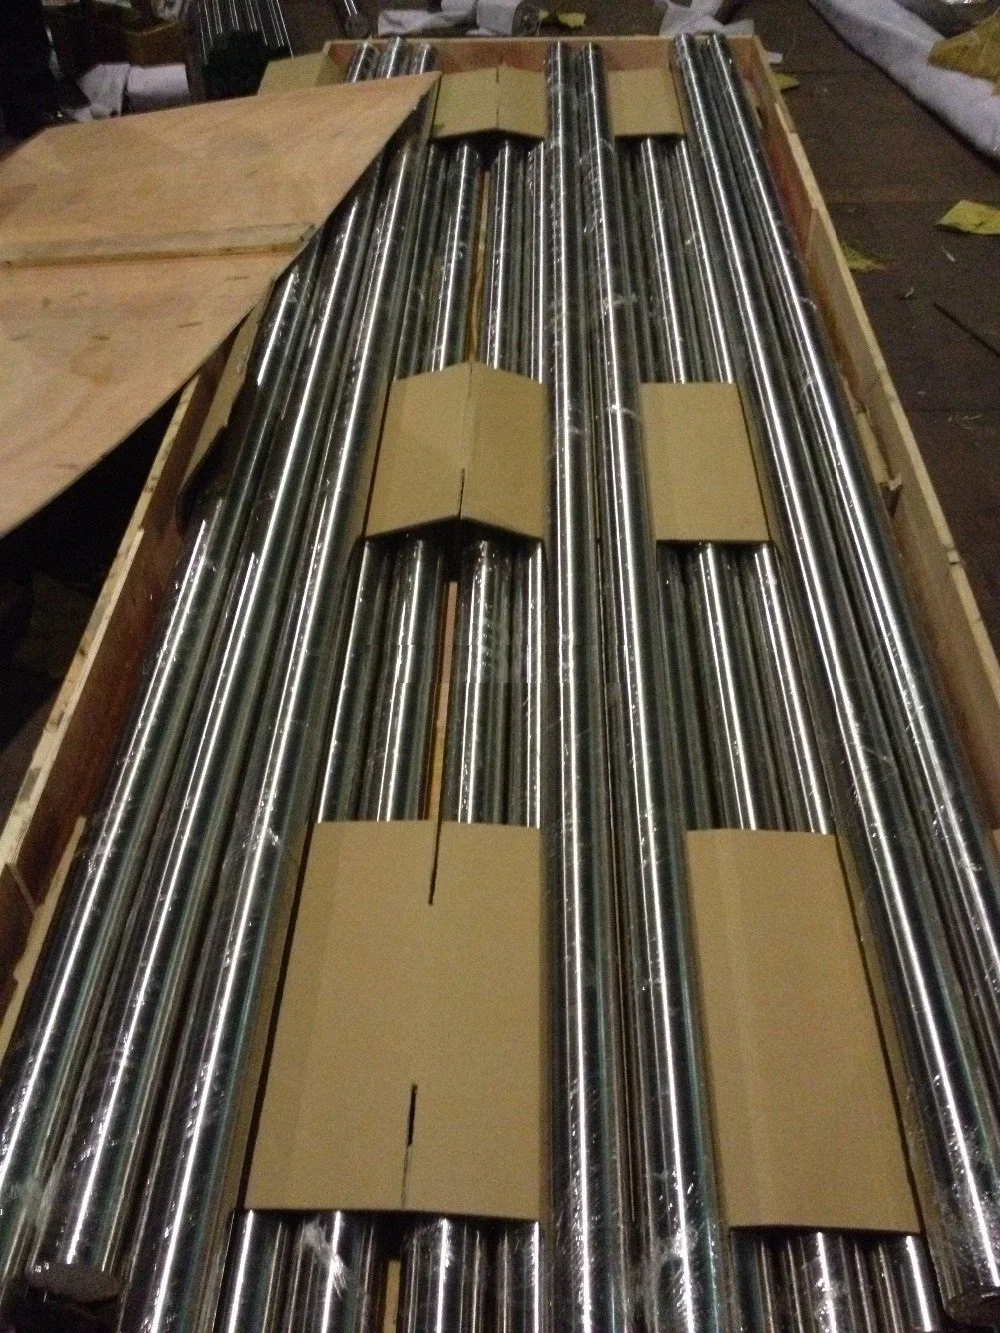 Ss 303 Bars, ASTM A276 303 Stainless Steel Bars Stainless Steel 304 Round Bars, Ss 304 Rods 316